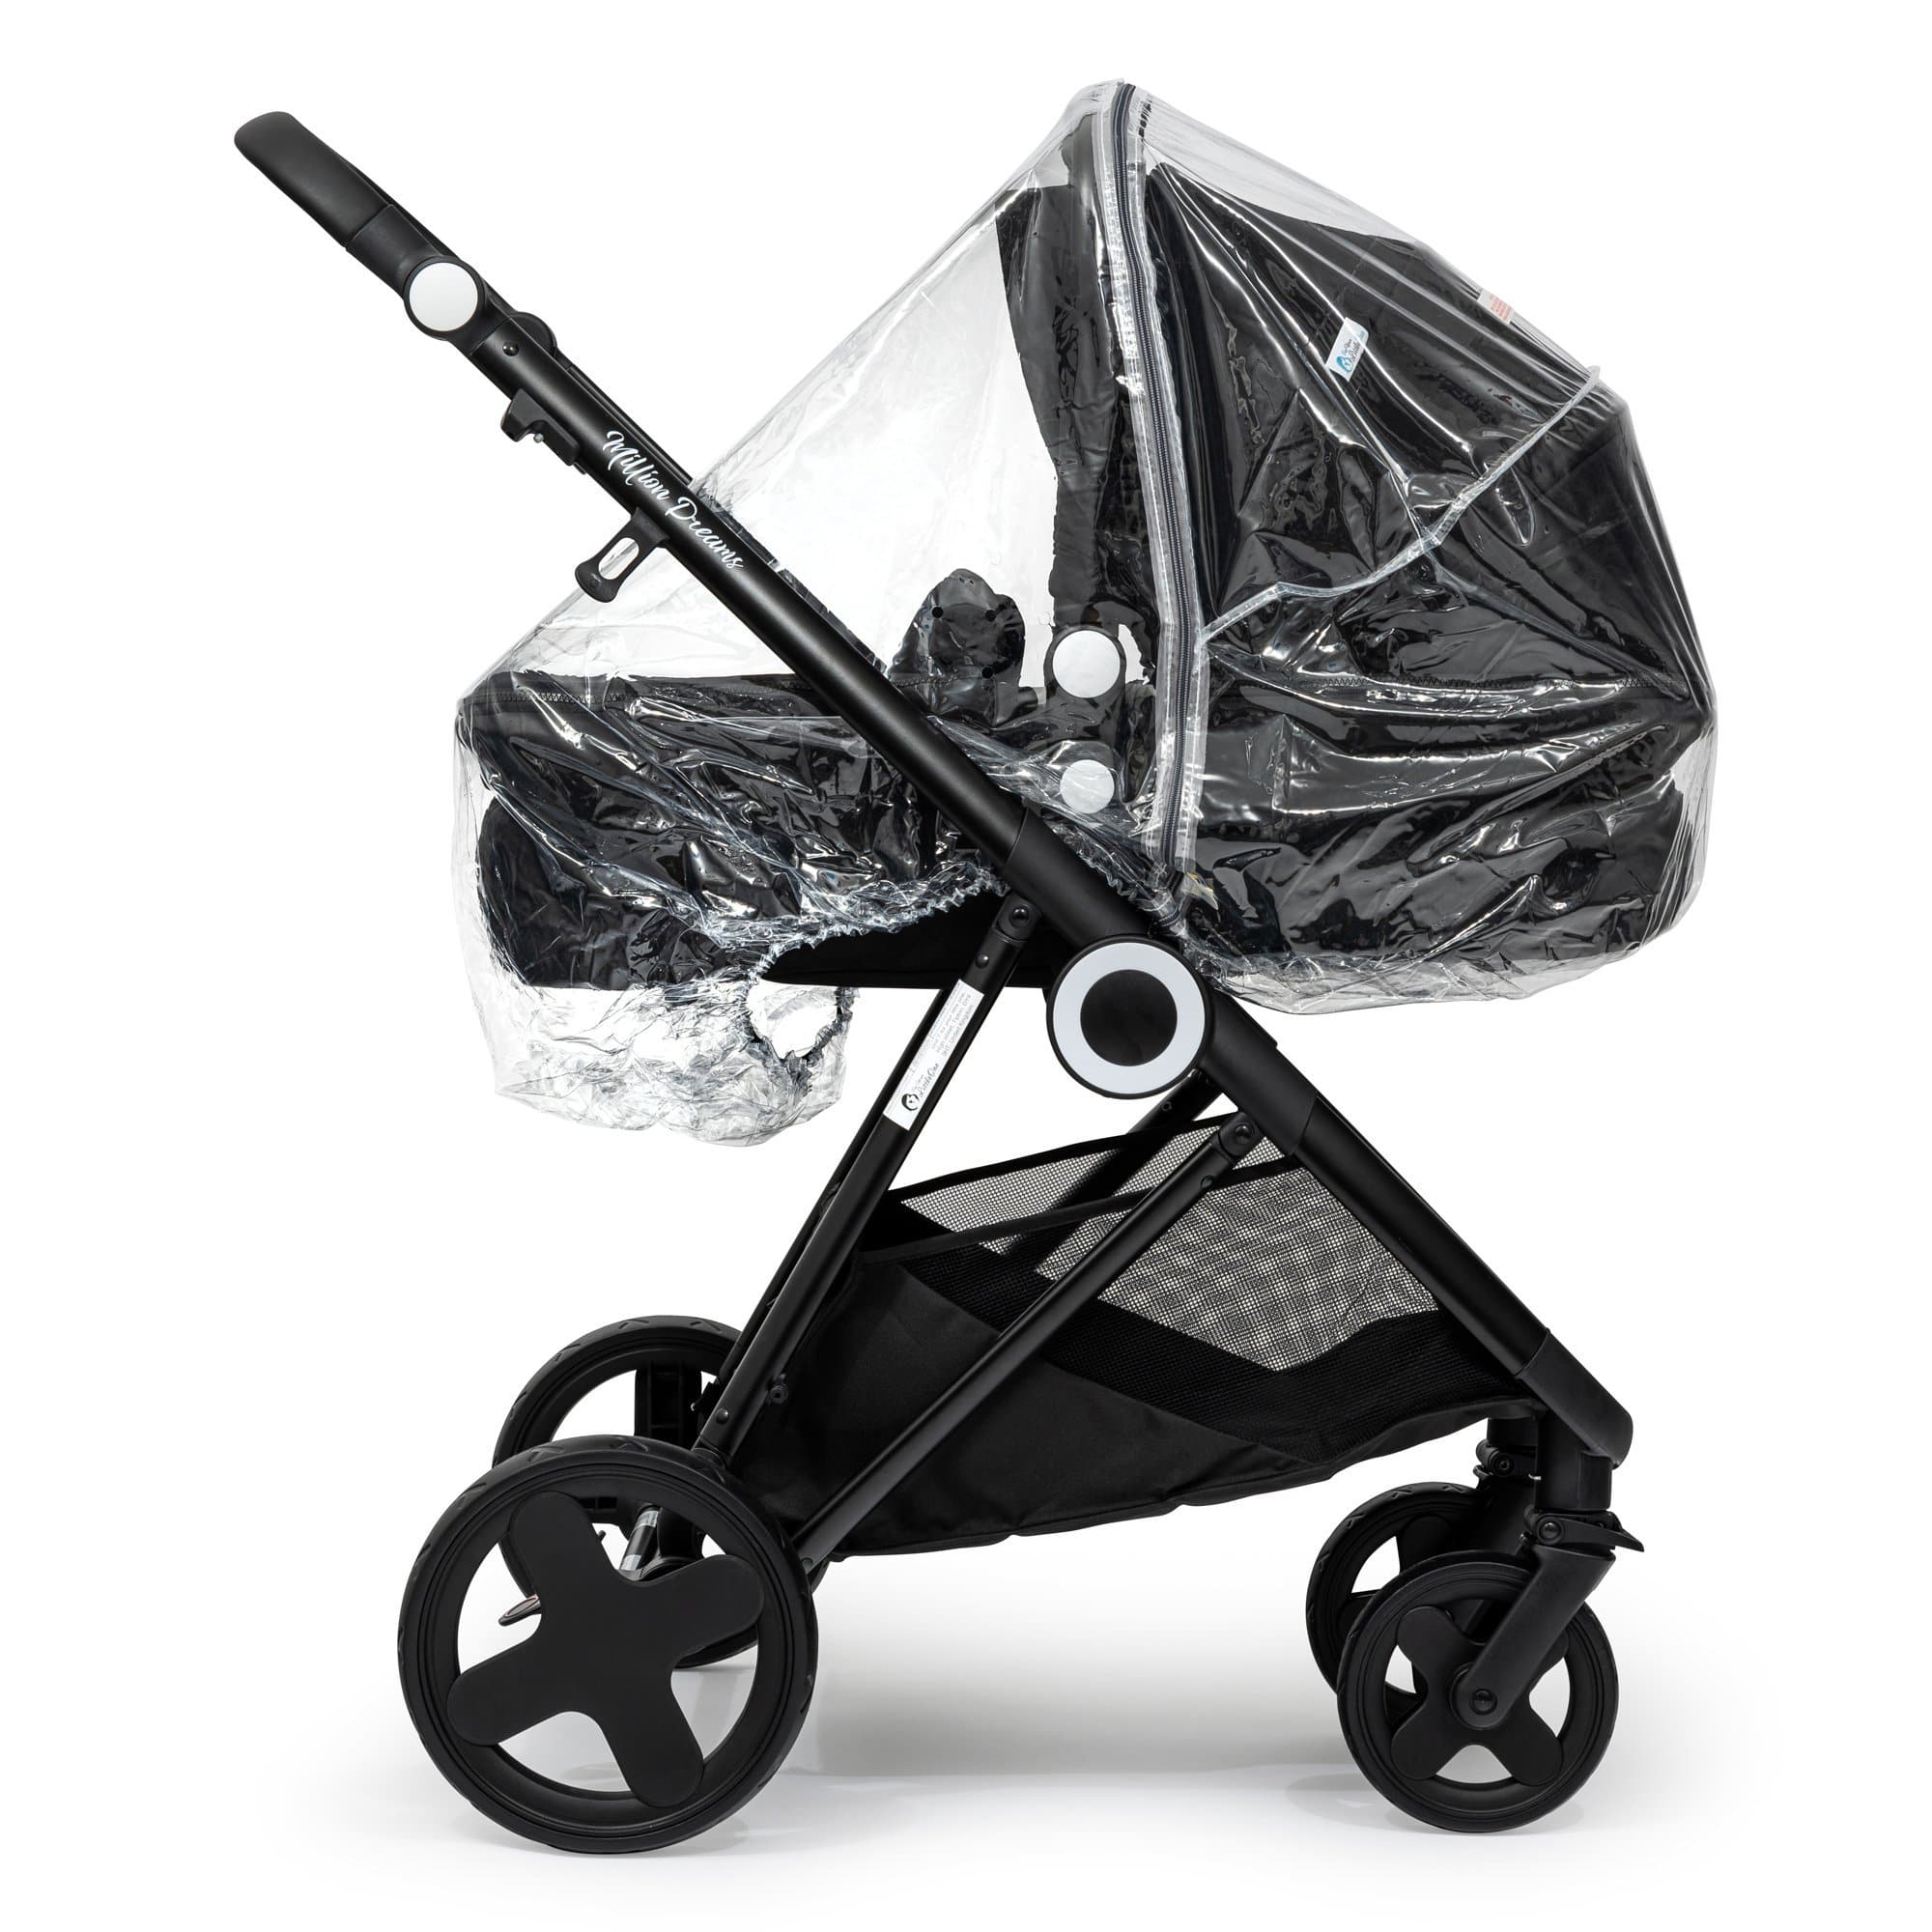 2 in 1 Rain Cover Compatible with Cam - Fits All Models - For Your Little One